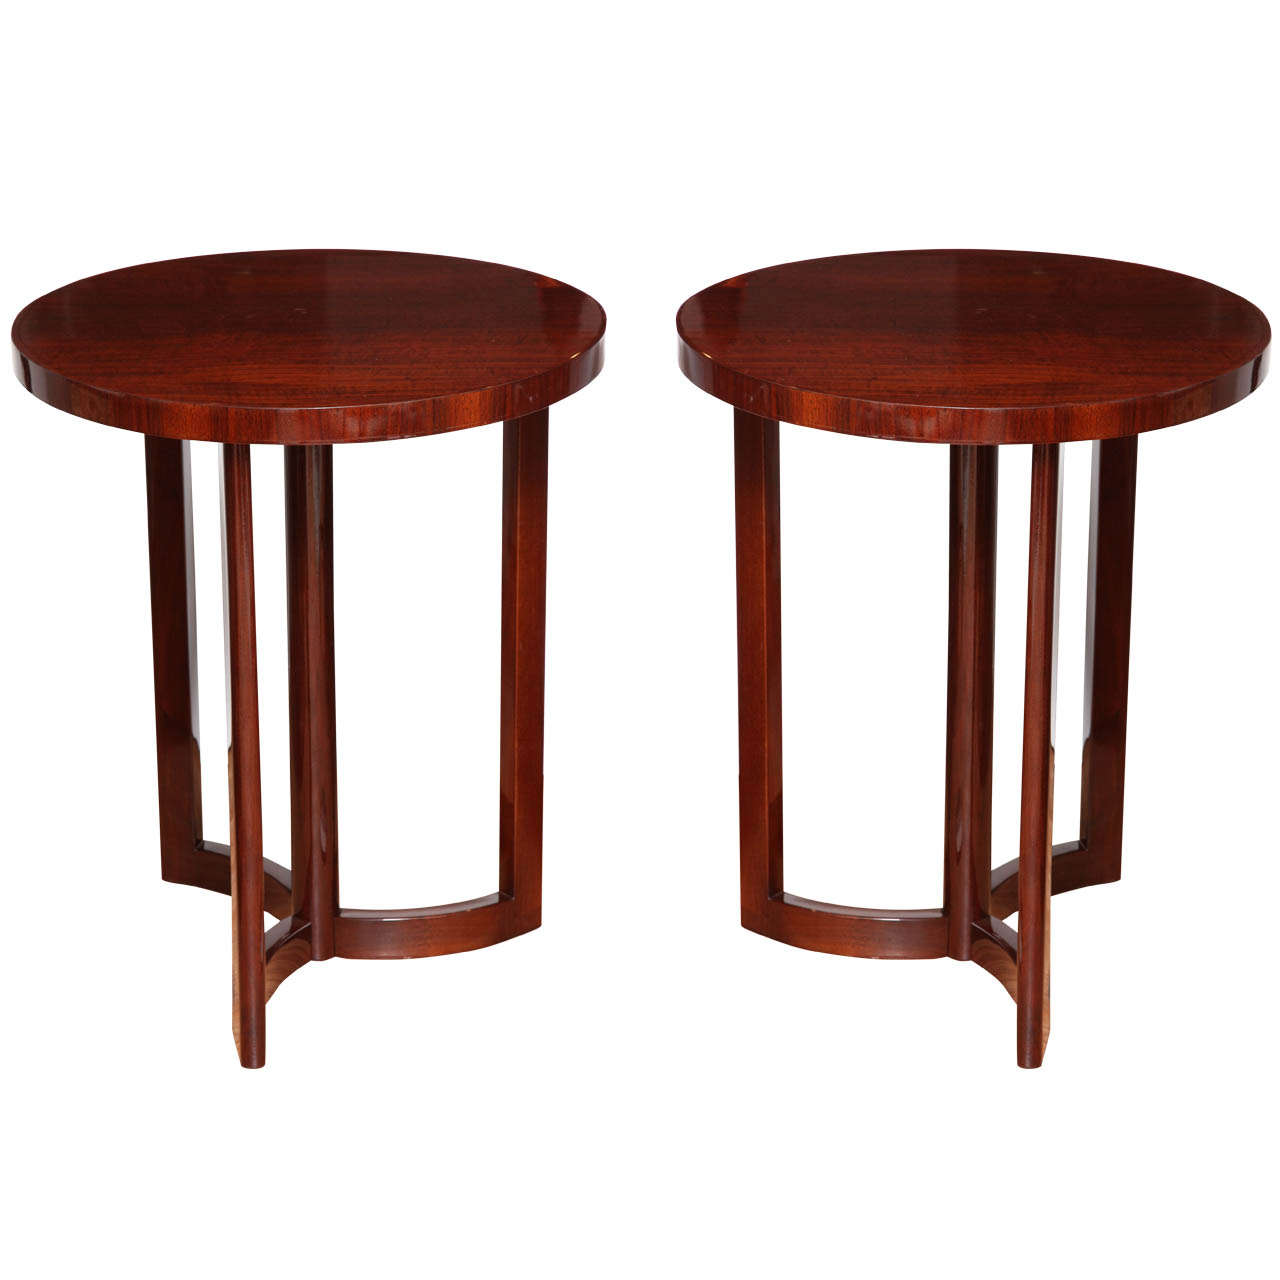 Pair of Art Deco Machine Age Tables in a Pinwheel Design from the Late 1940s For Sale